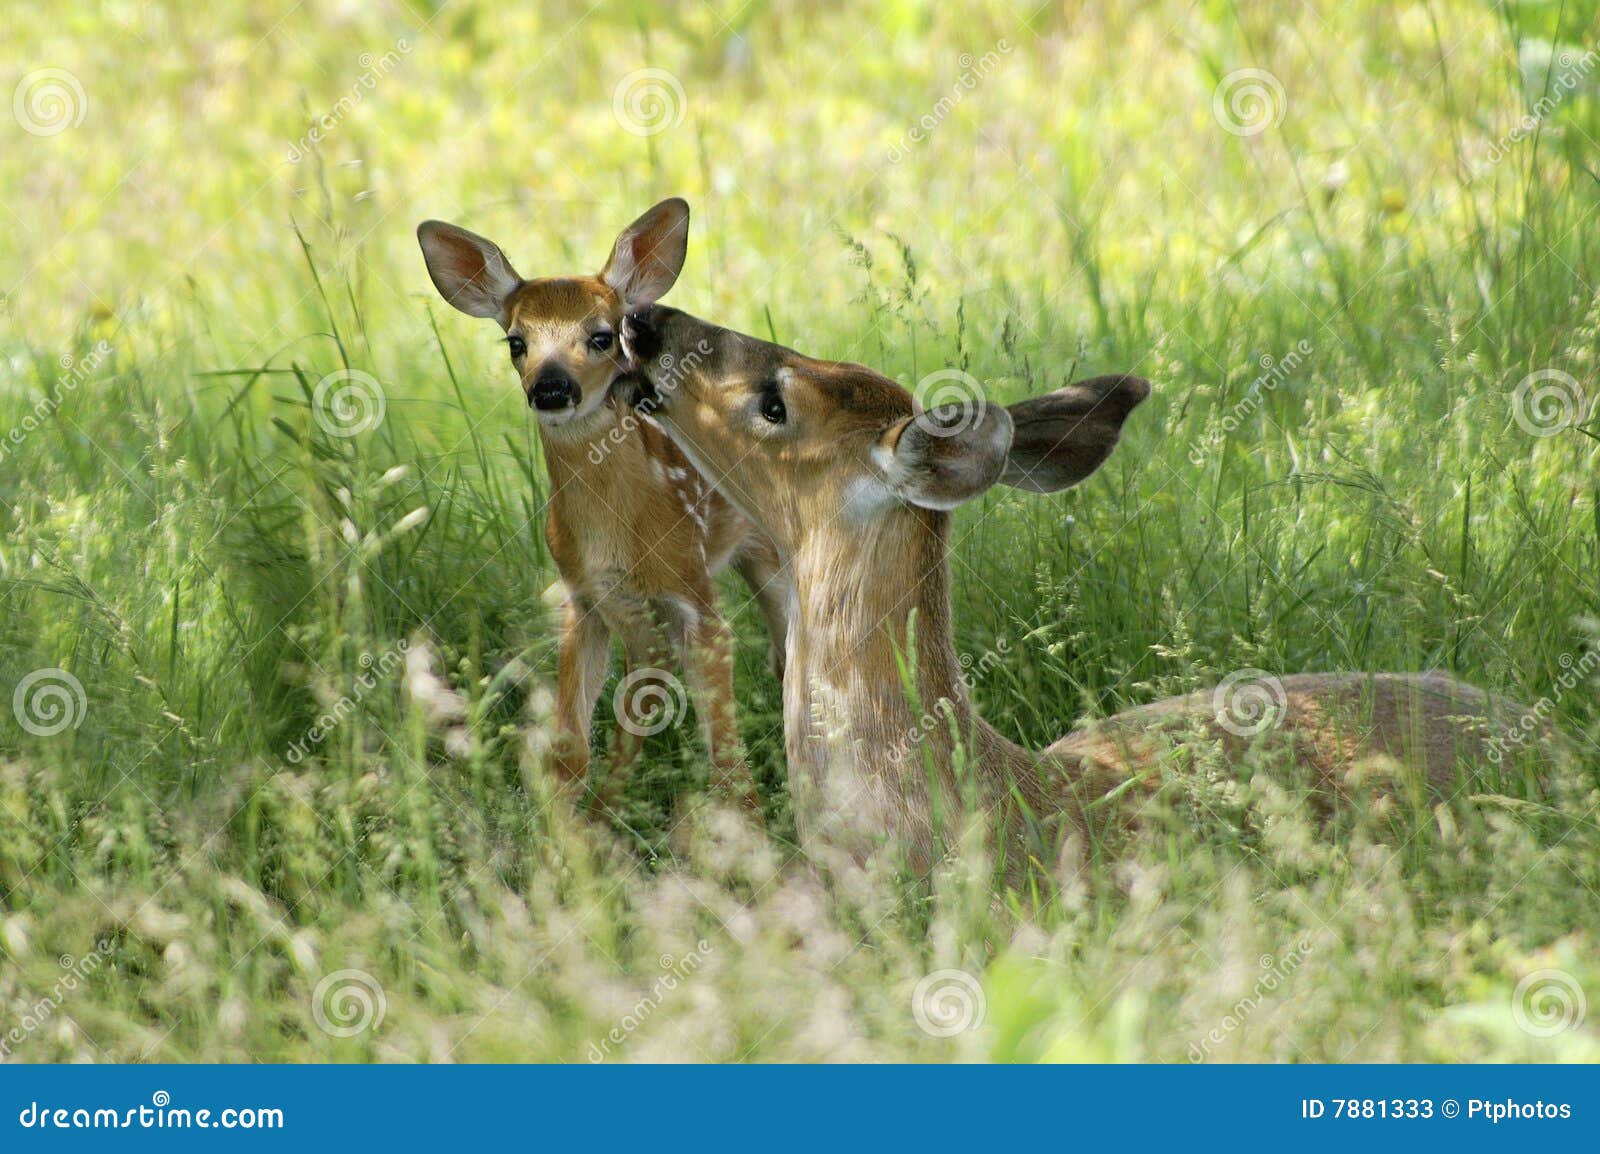 doe and fawn - a mother's love